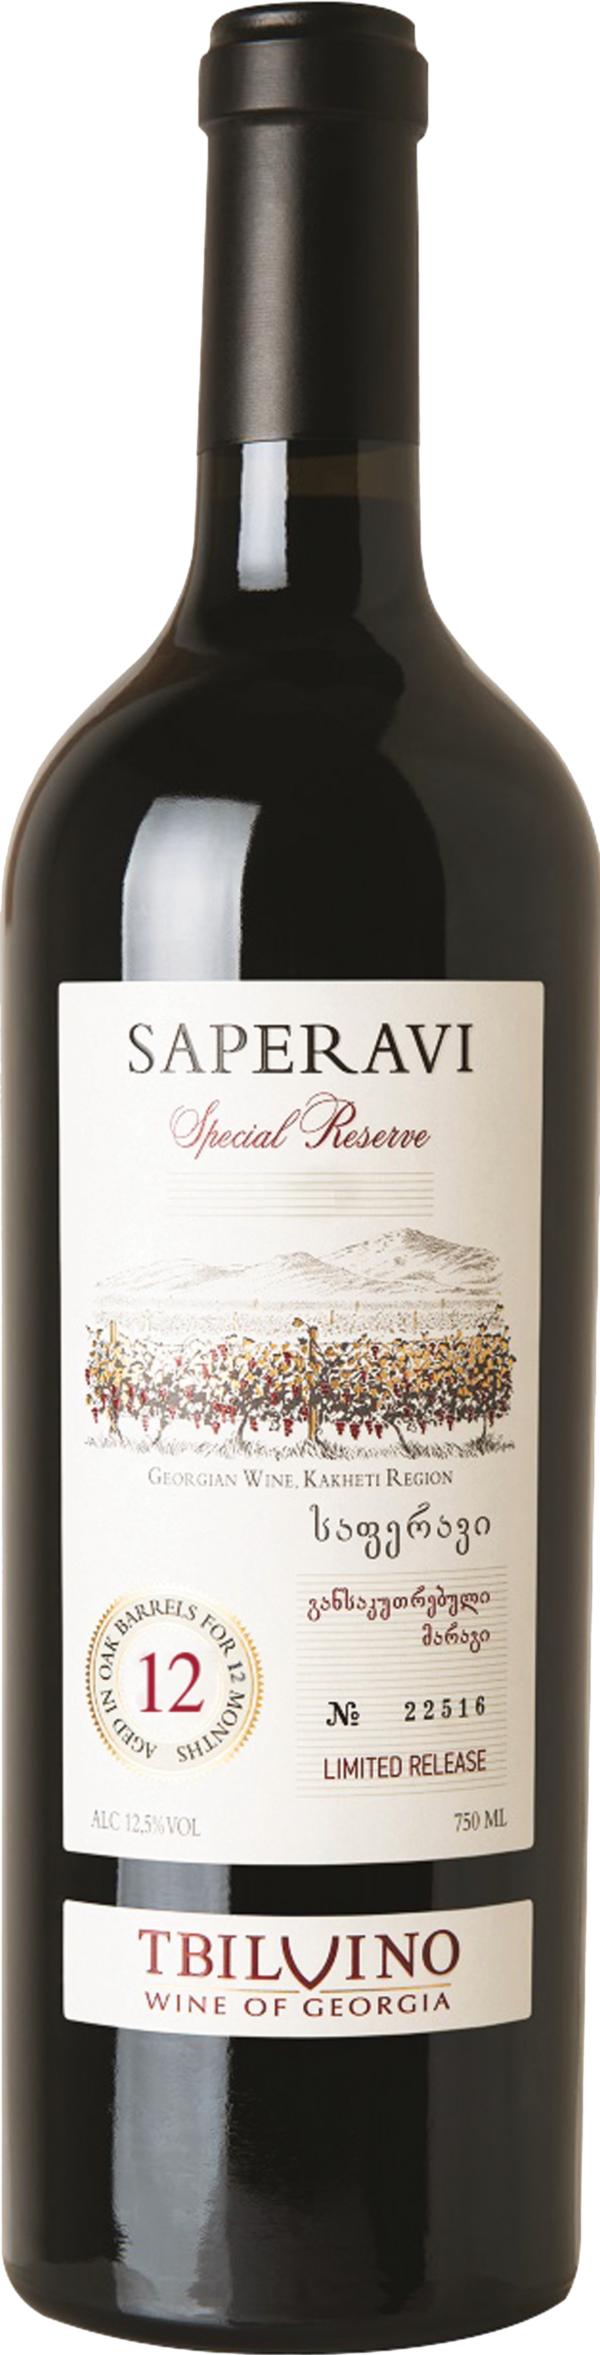 Product image of Tbilvino Saperavi Special Reserve 2020 from 8wines